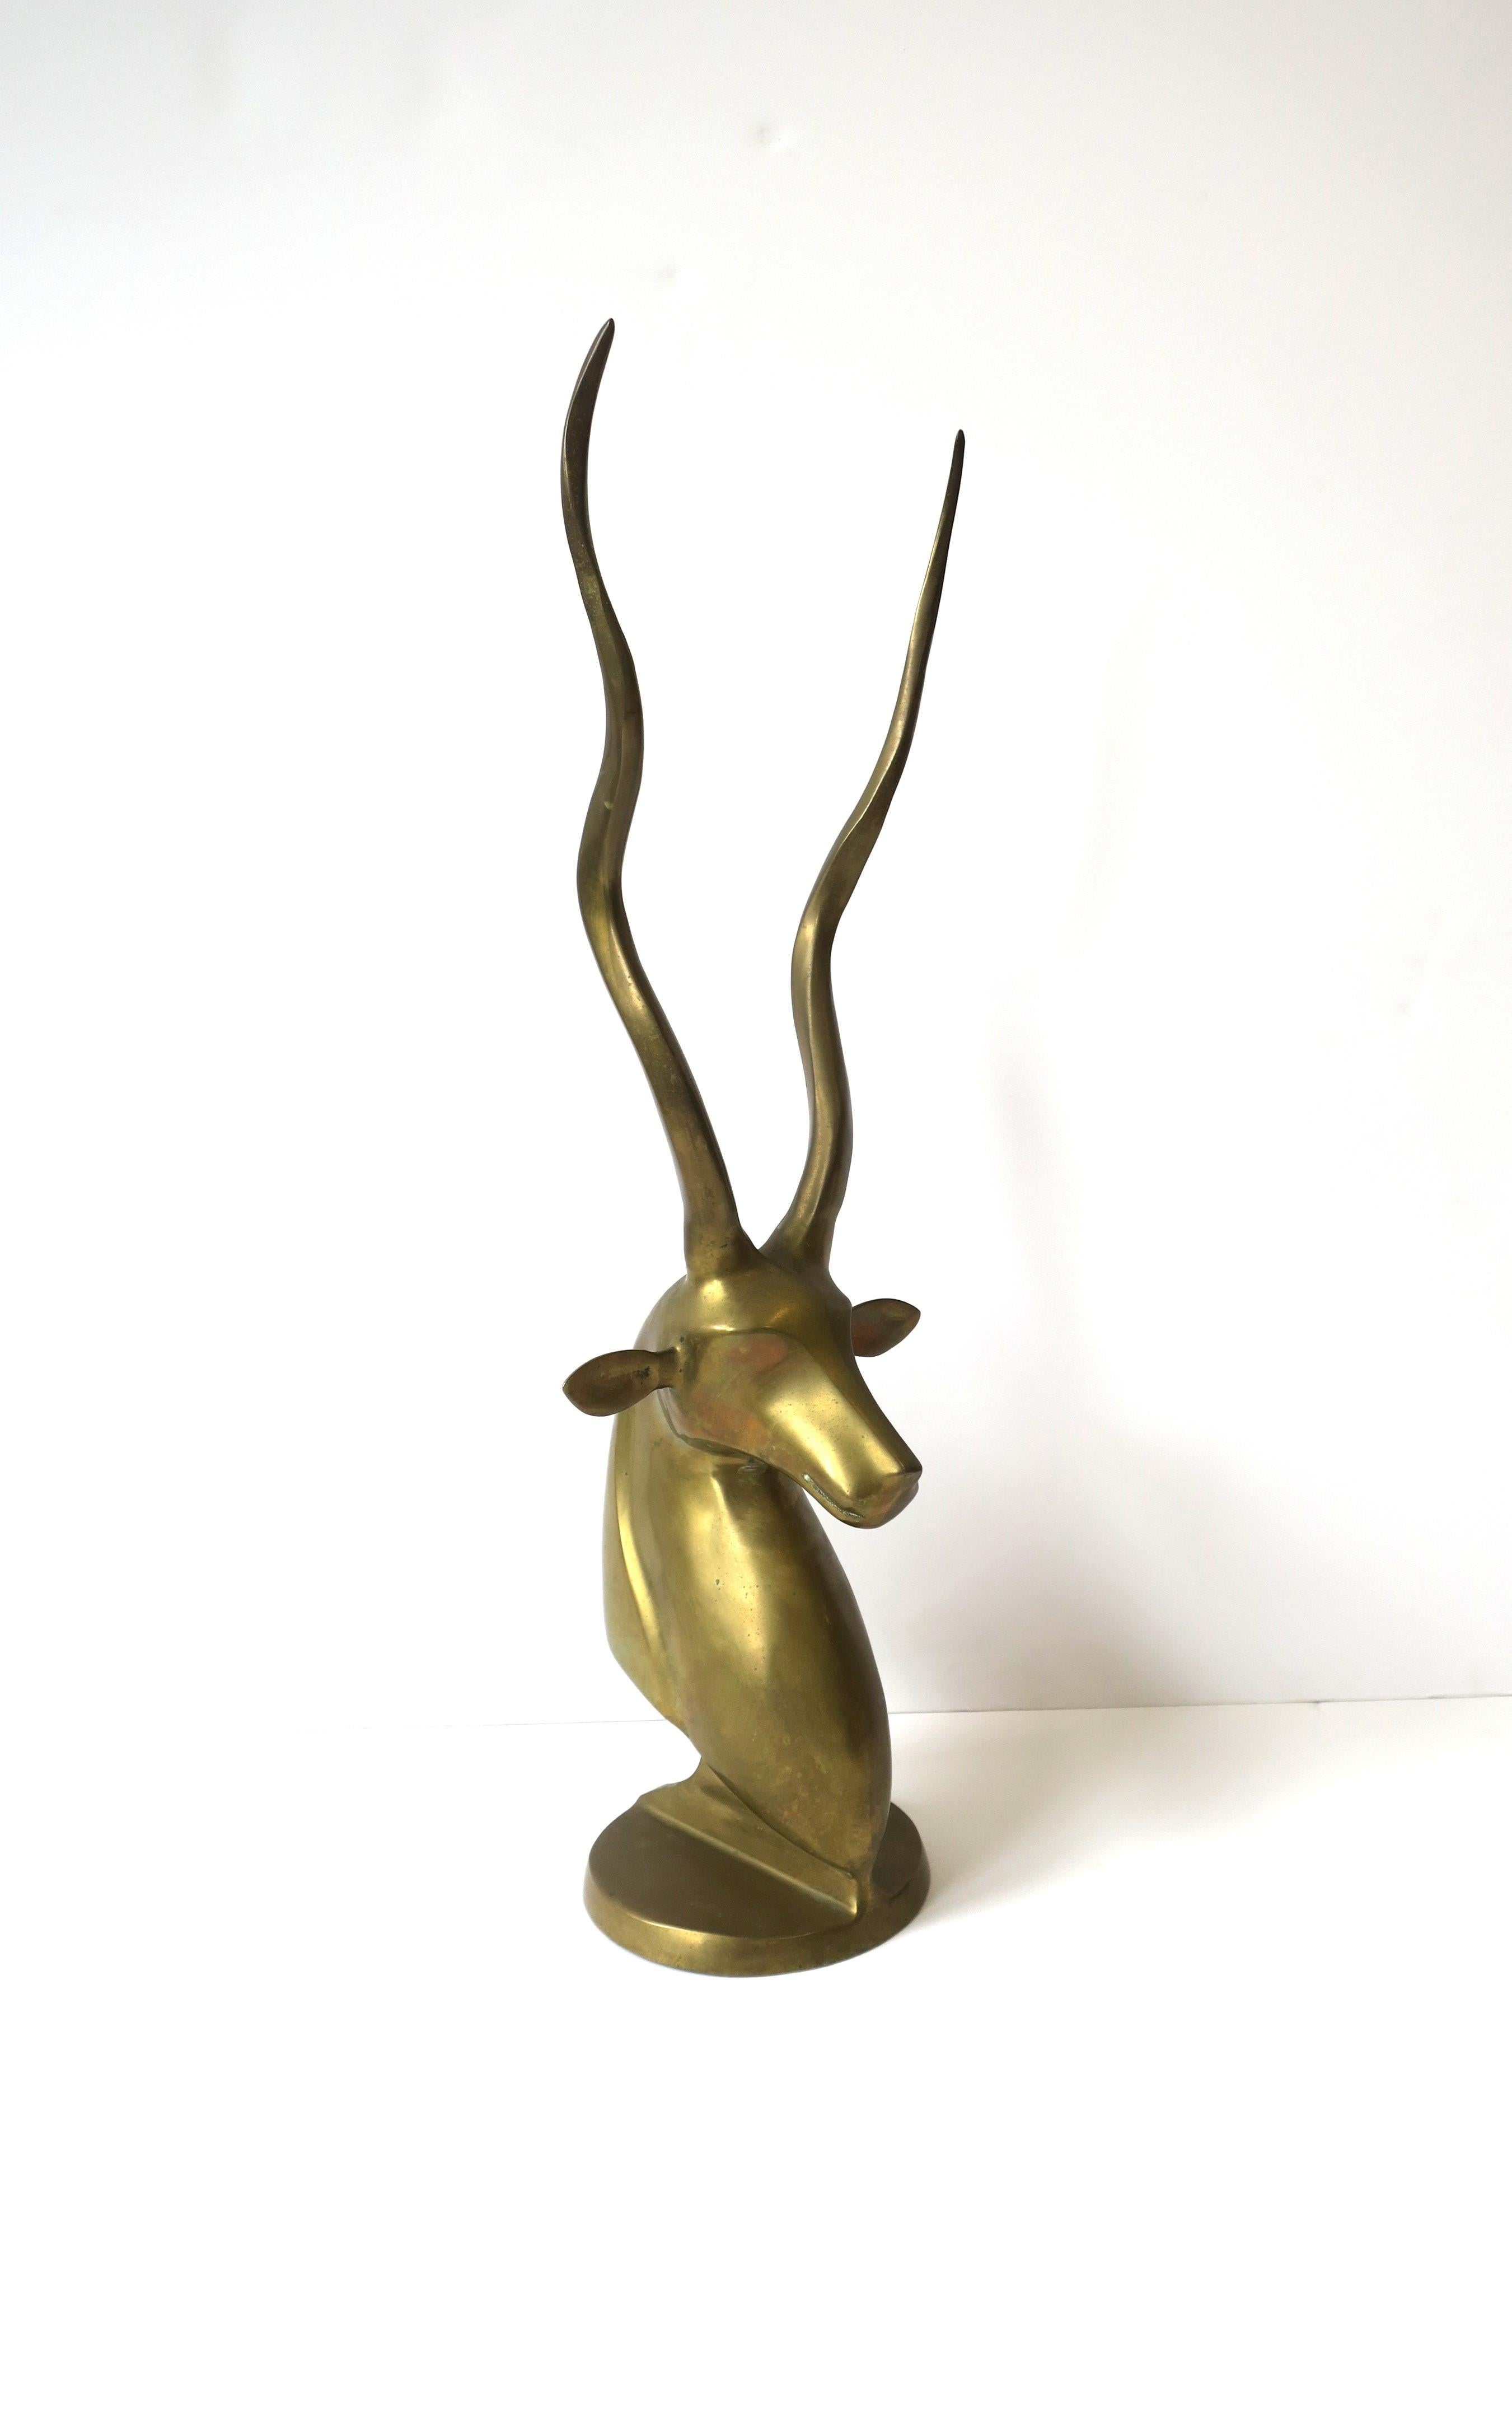 Late 20th Century Brass Gazelle Antelope Sculpture Decorative Object, Tall For Sale